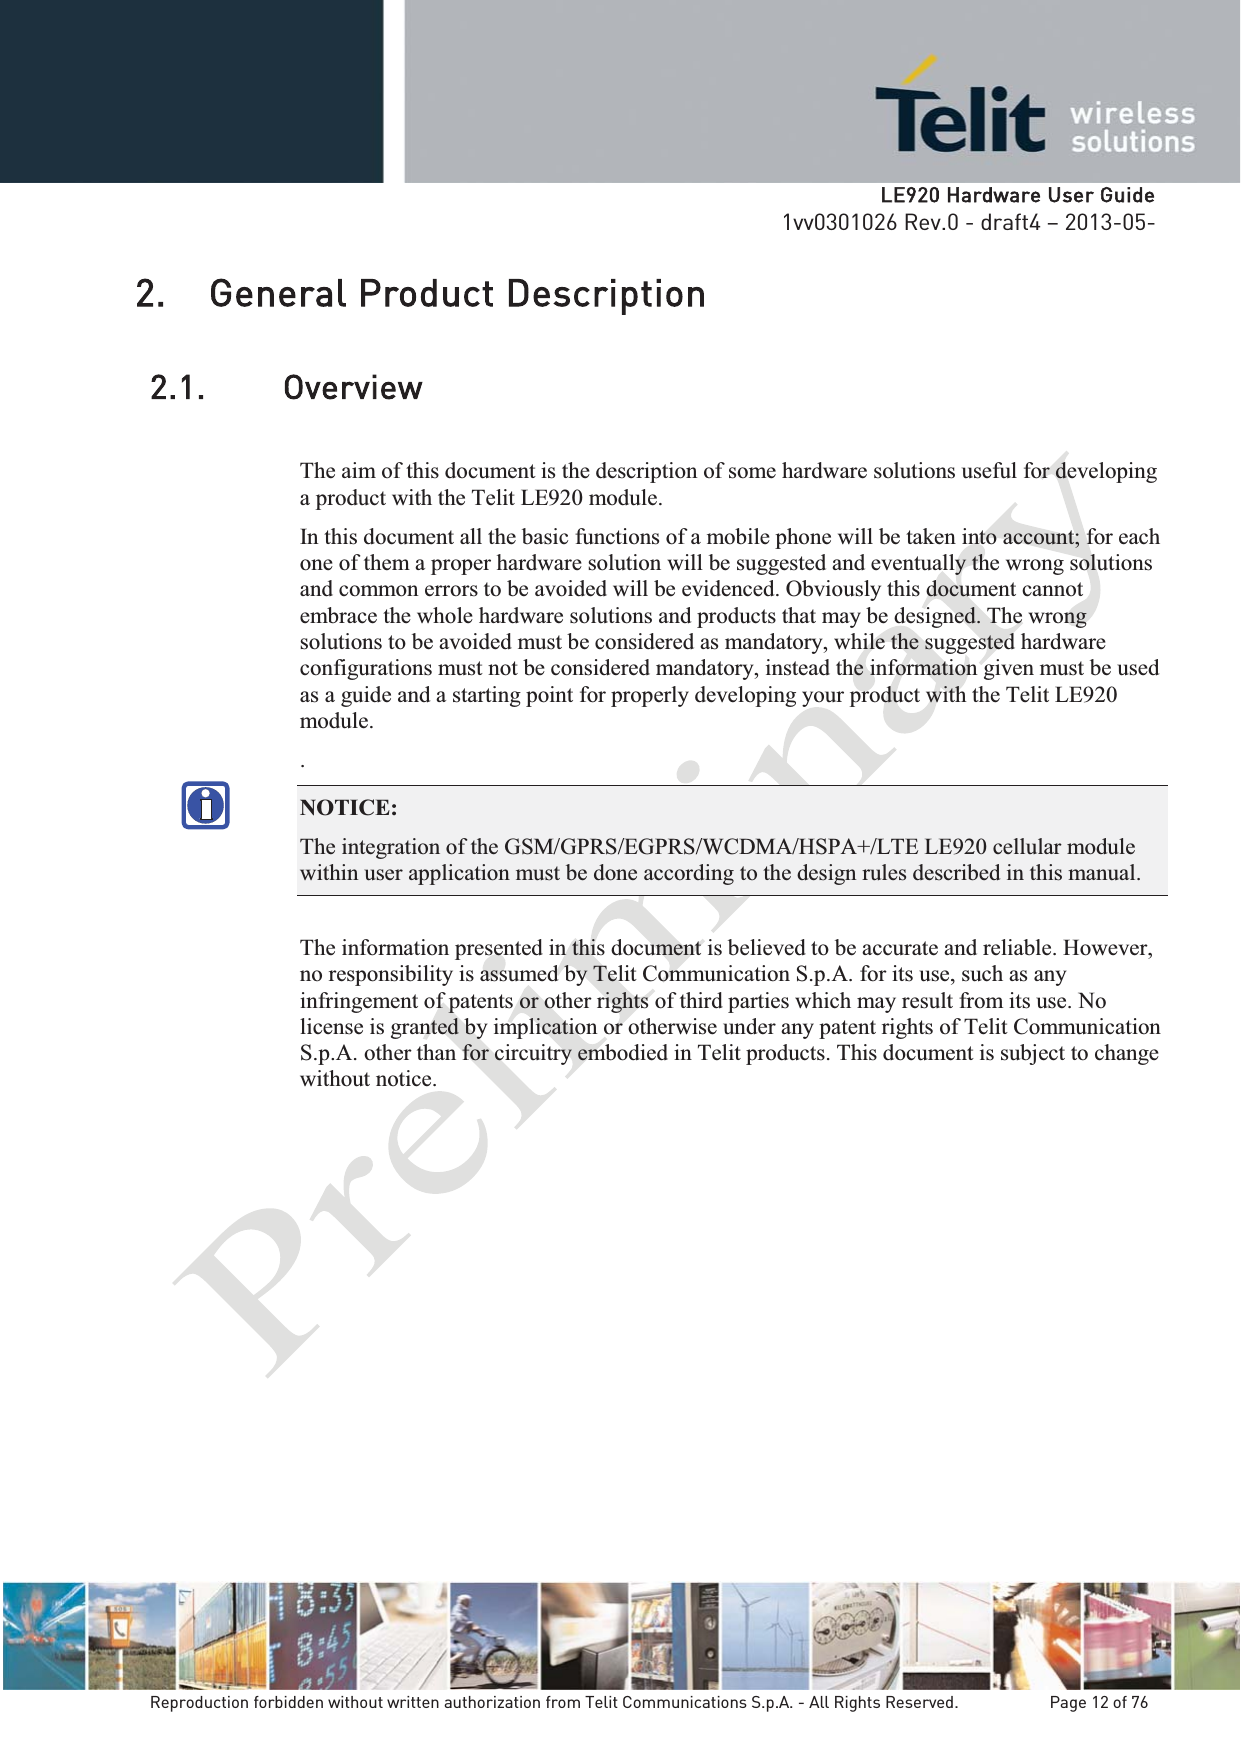   LLE920 Hardware User Guide1vv0301026 Rev.0 - draft4 – 2013-05-Reproduction forbidden without written authorization from Telit Communications S.p.A. - All Rights Reserved.    Page 12 of 76 2. General Product Description 2.1. Overview The aim of this document is the description of some hardware solutions useful for developing a product with the Telit LE920 module. In this document all the basic functions of a mobile phone will be taken into account; for each one of them a proper hardware solution will be suggested and eventually the wrong solutions and common errors to be avoided will be evidenced. Obviously this document cannot embrace the whole hardware solutions and products that may be designed. The wrong solutions to be avoided must be considered as mandatory, while the suggested hardware configurations must not be considered mandatory, instead the information given must be used as a guide and a starting point for properly developing your product with the Telit LE920 module. . NOTICE: The integration of the GSM/GPRS/EGPRS/WCDMA/HSPA+/LTE LE920 cellular module within user application must be done according to the design rules described in this manual.   The information presented in this document is believed to be accurate and reliable. However, no responsibility is assumed by Telit Communication S.p.A. for its use, such as any infringement of patents or other rights of third parties which may result from its use. No license is granted by implication or otherwise under any patent rights of Telit Communication S.p.A. other than for circuitry embodied in Telit products. This document is subject to change without notice.   